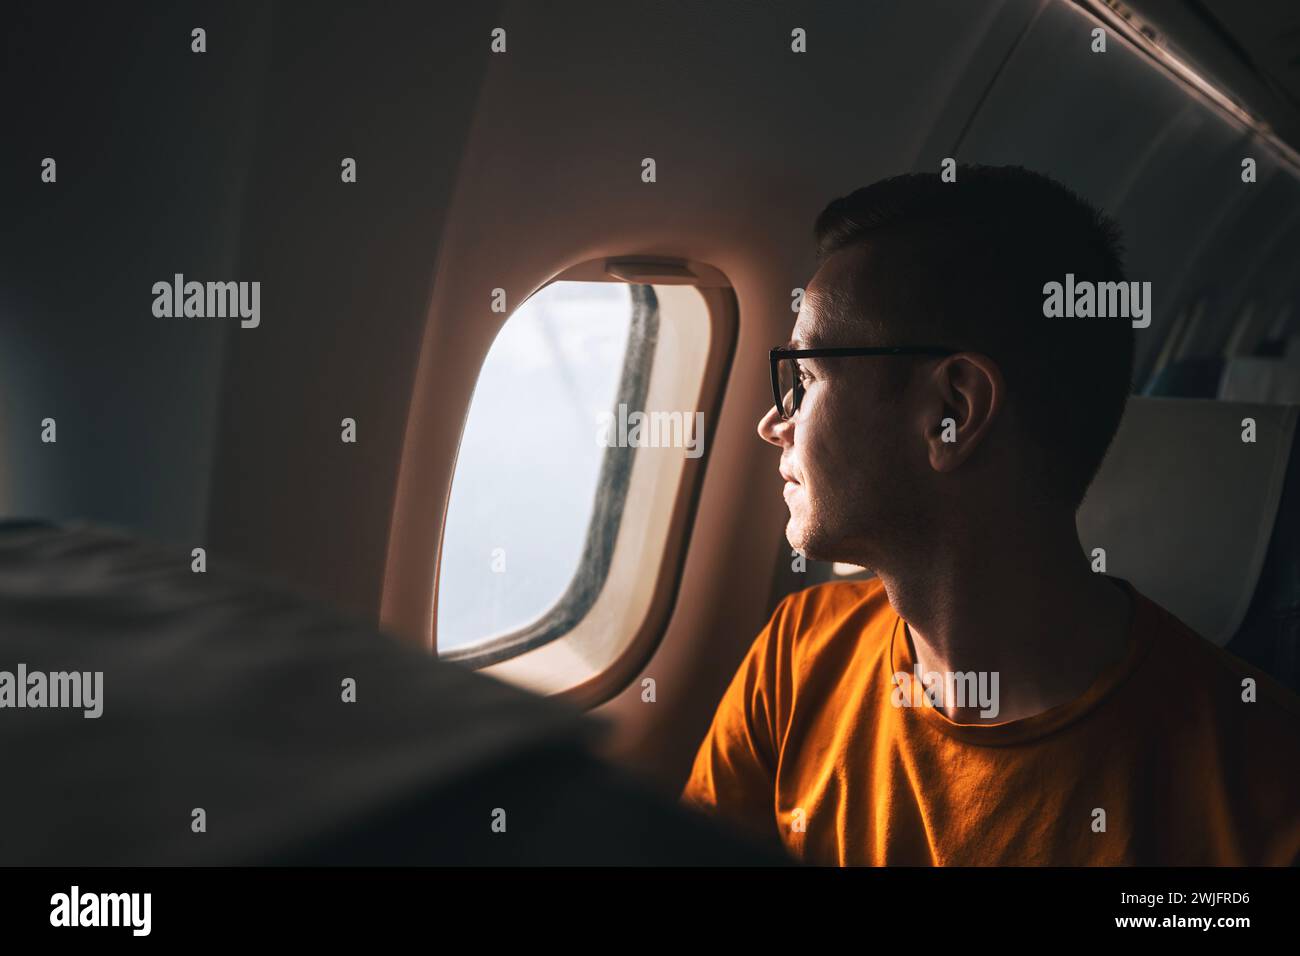 Portrait of man traveling by airplane. Passenger looking through plane window during flight. Stock Photo